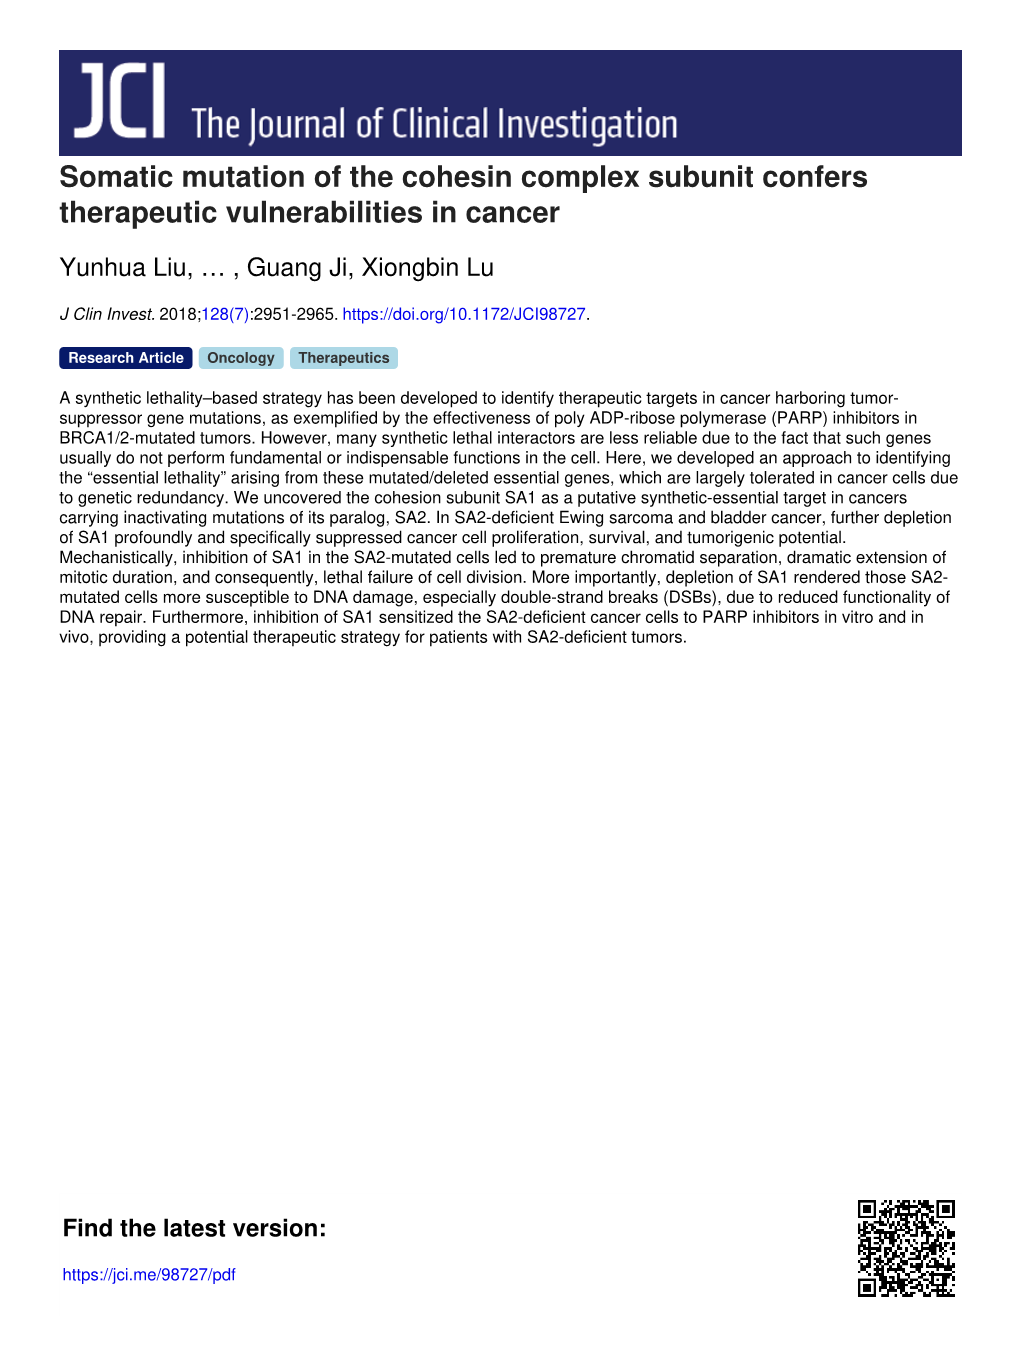 Somatic Mutation of the Cohesin Complex Subunit Confers Therapeutic Vulnerabilities in Cancer